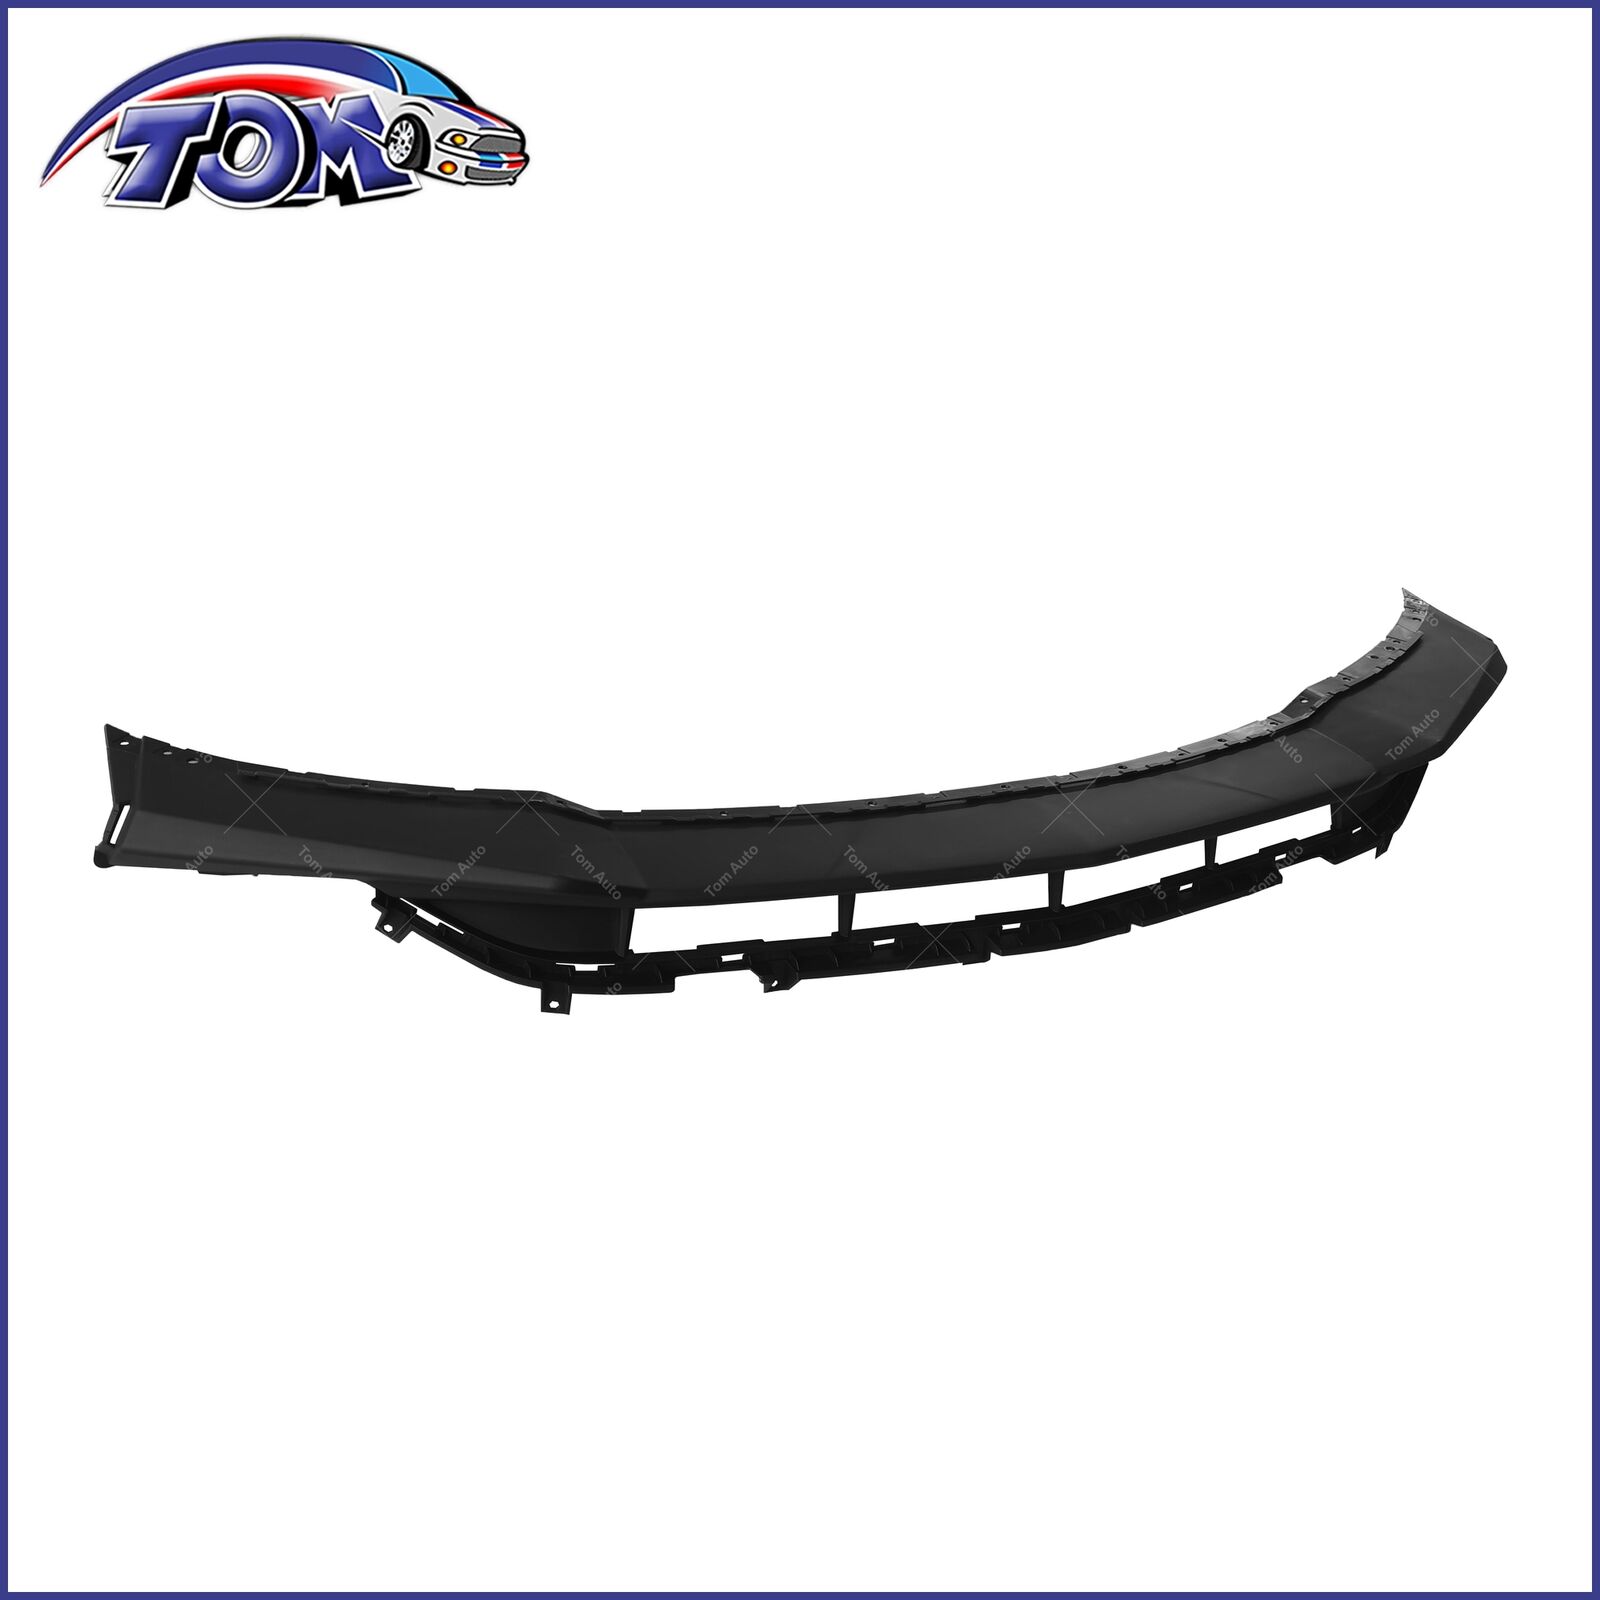 New Bumper Cover Facial Front Lower for Chevy Malibu 16-18 GM1015138 23478398